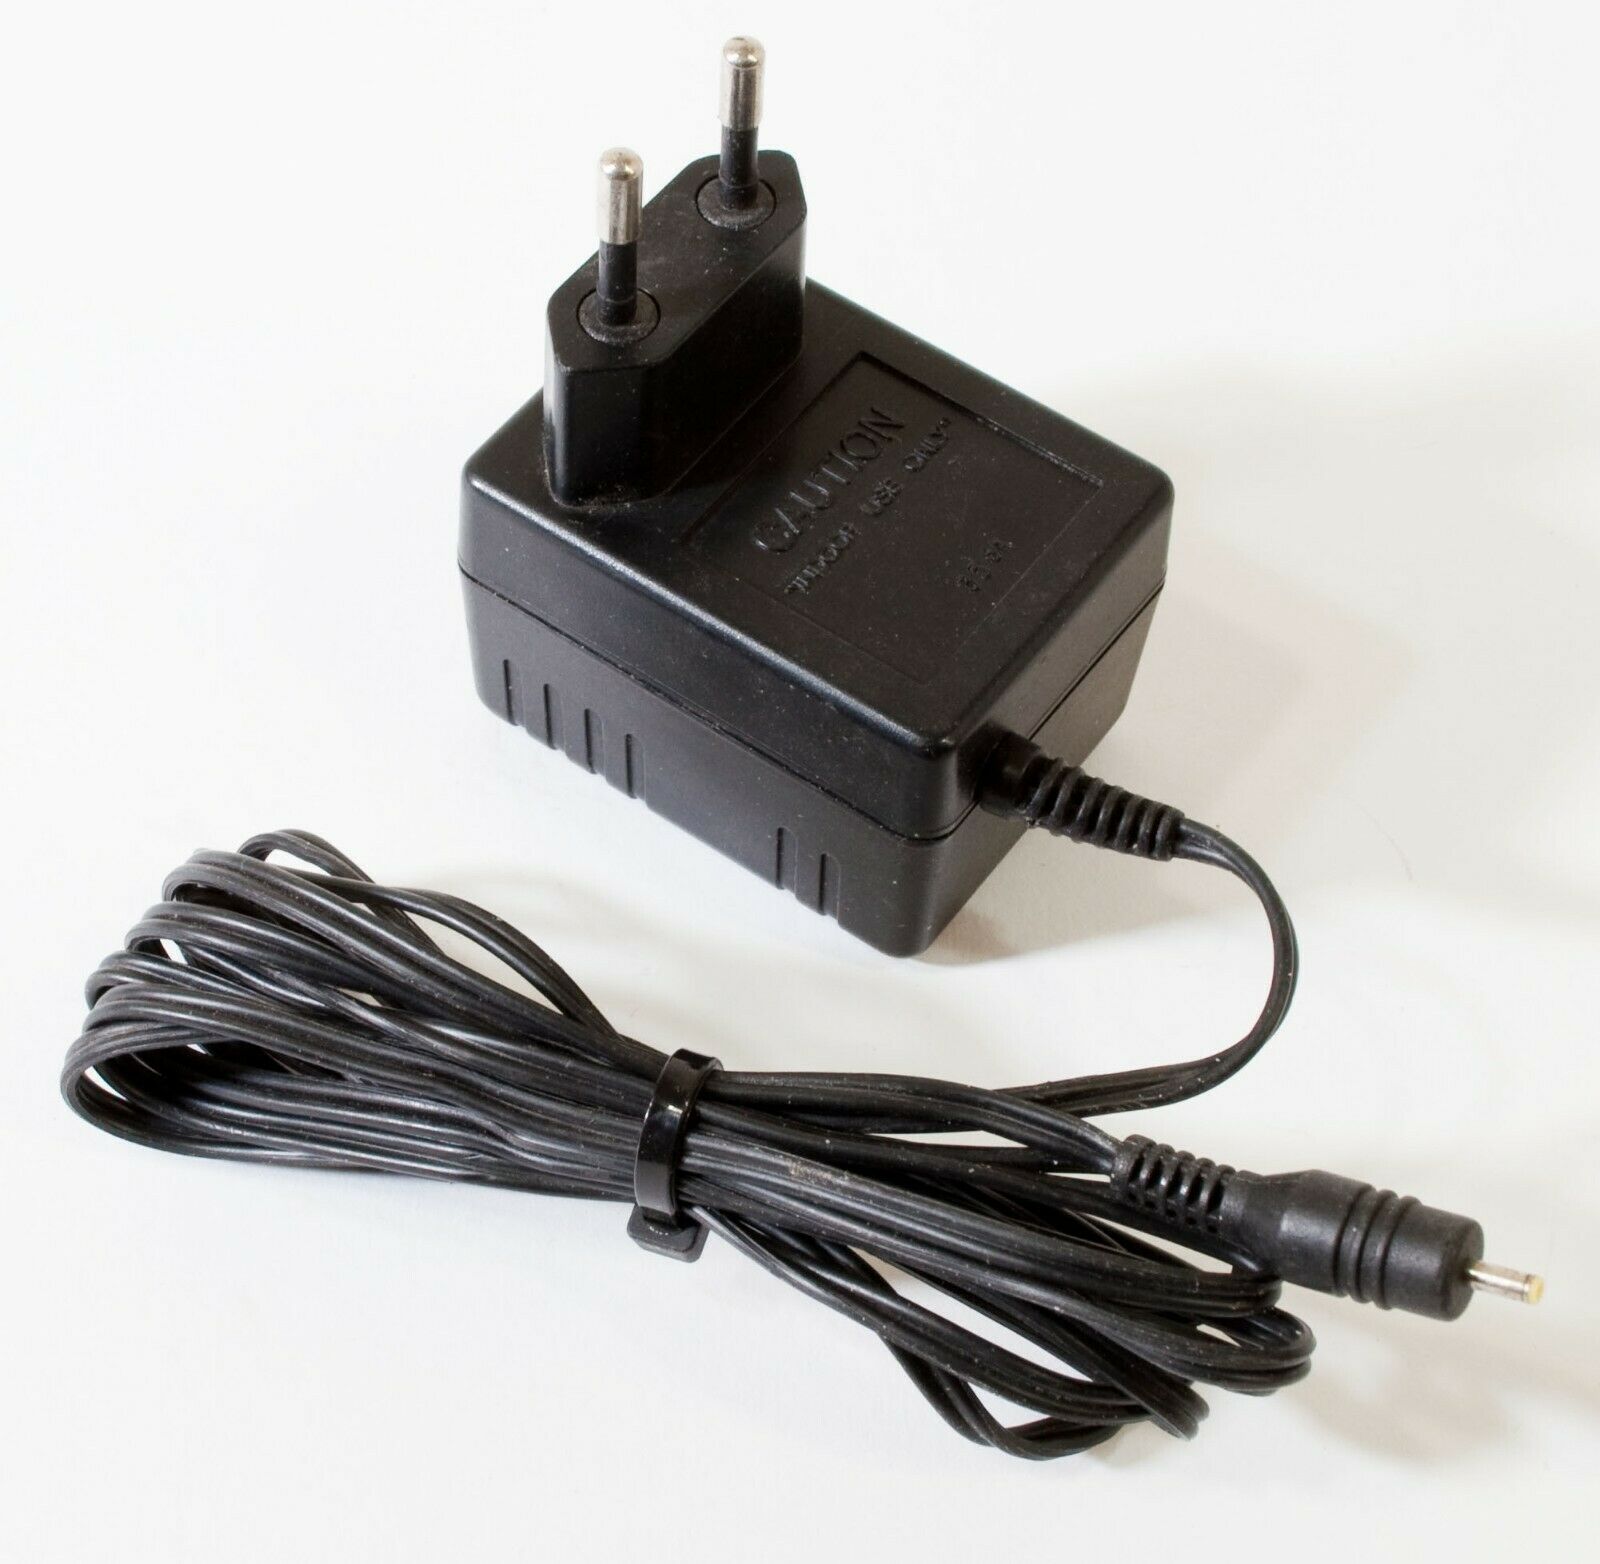 3111 278 30431 AC Adapter 7.5V 230mA Original Charger Power Supply Compatible Brand: Universal Brand: Unbranded Type